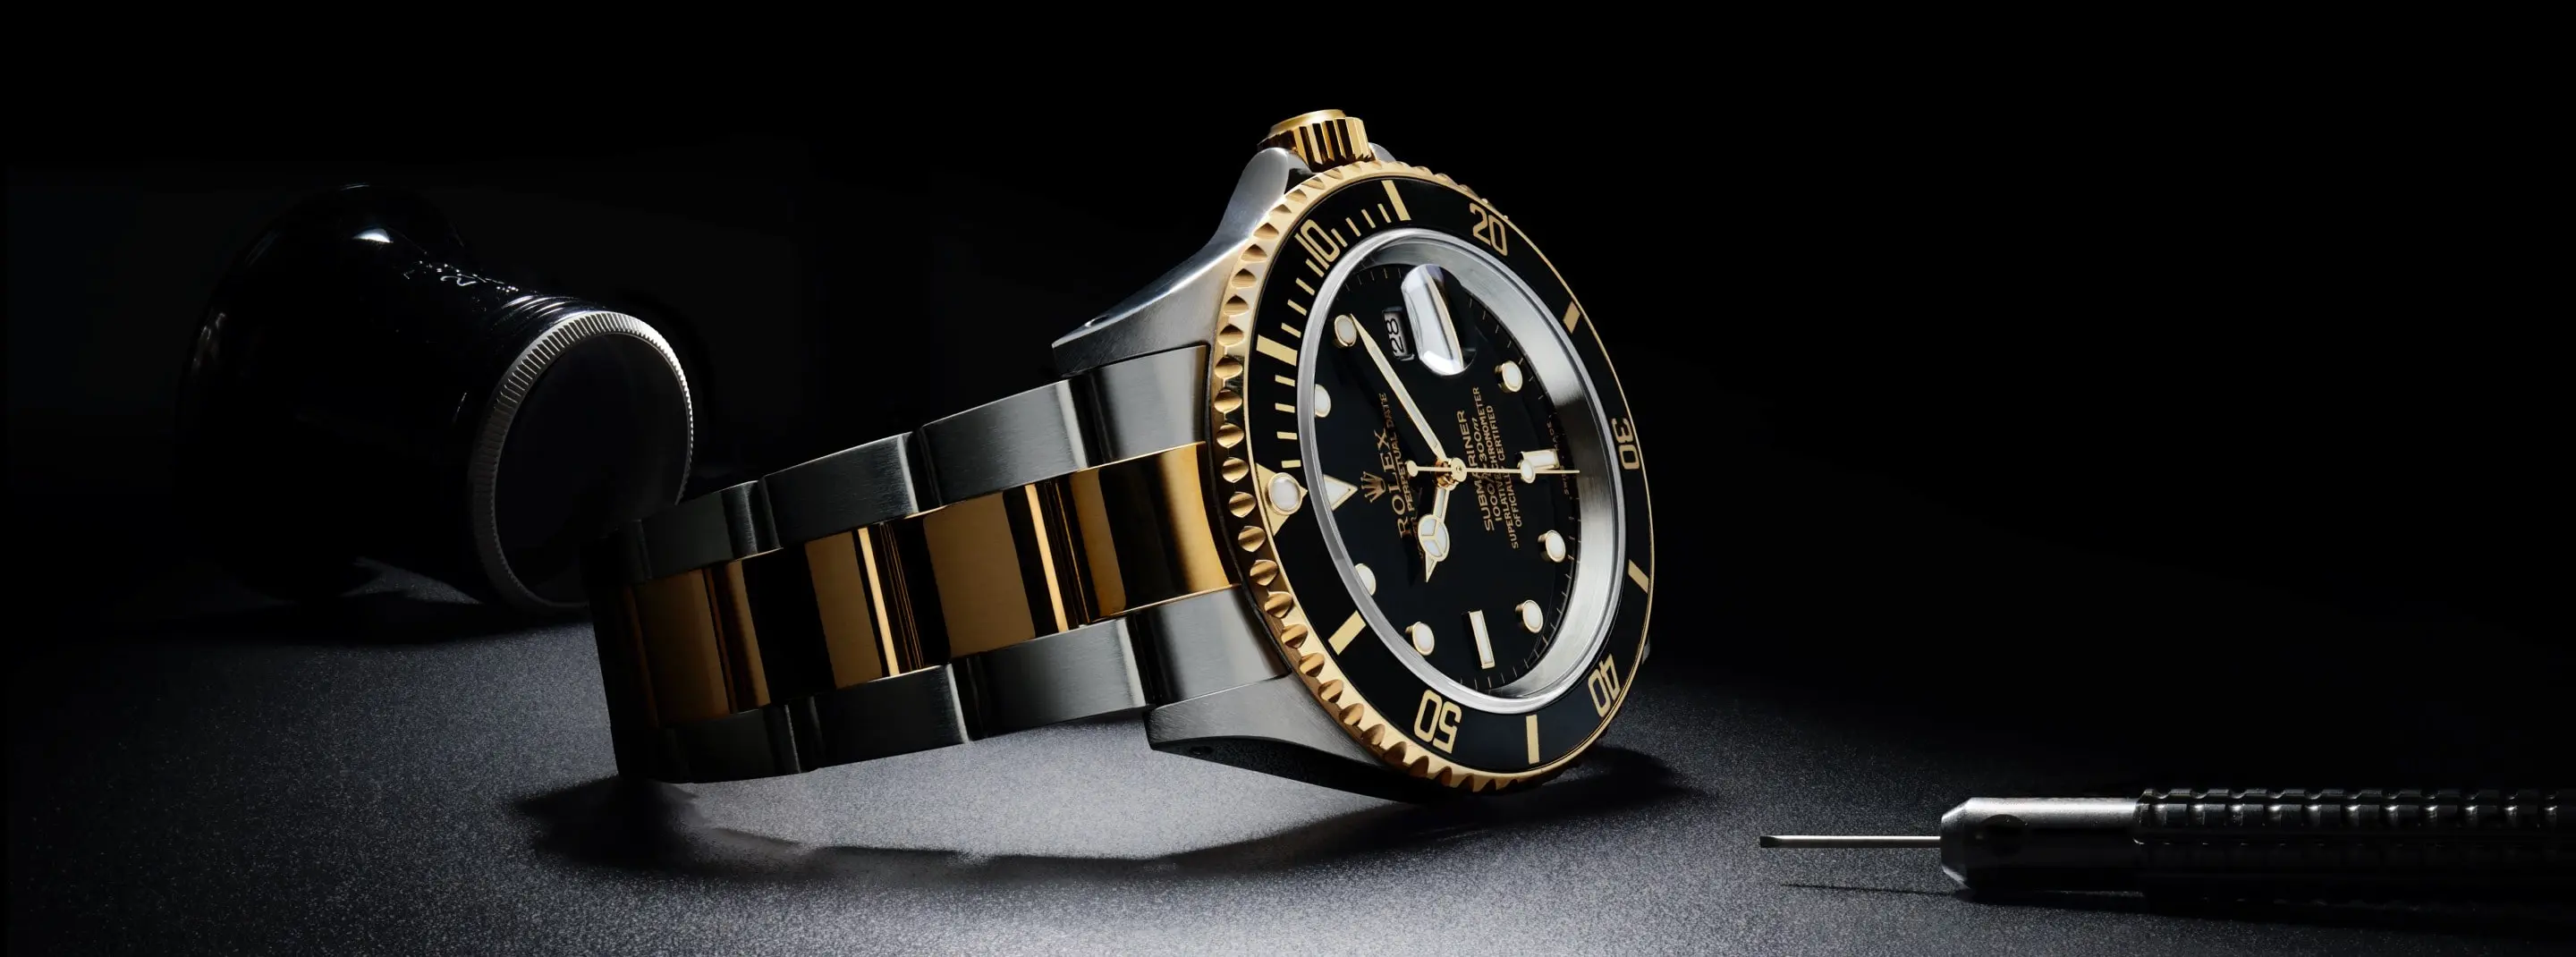 Each watch is certified by Rolex and comes with a two-year international guarantee.